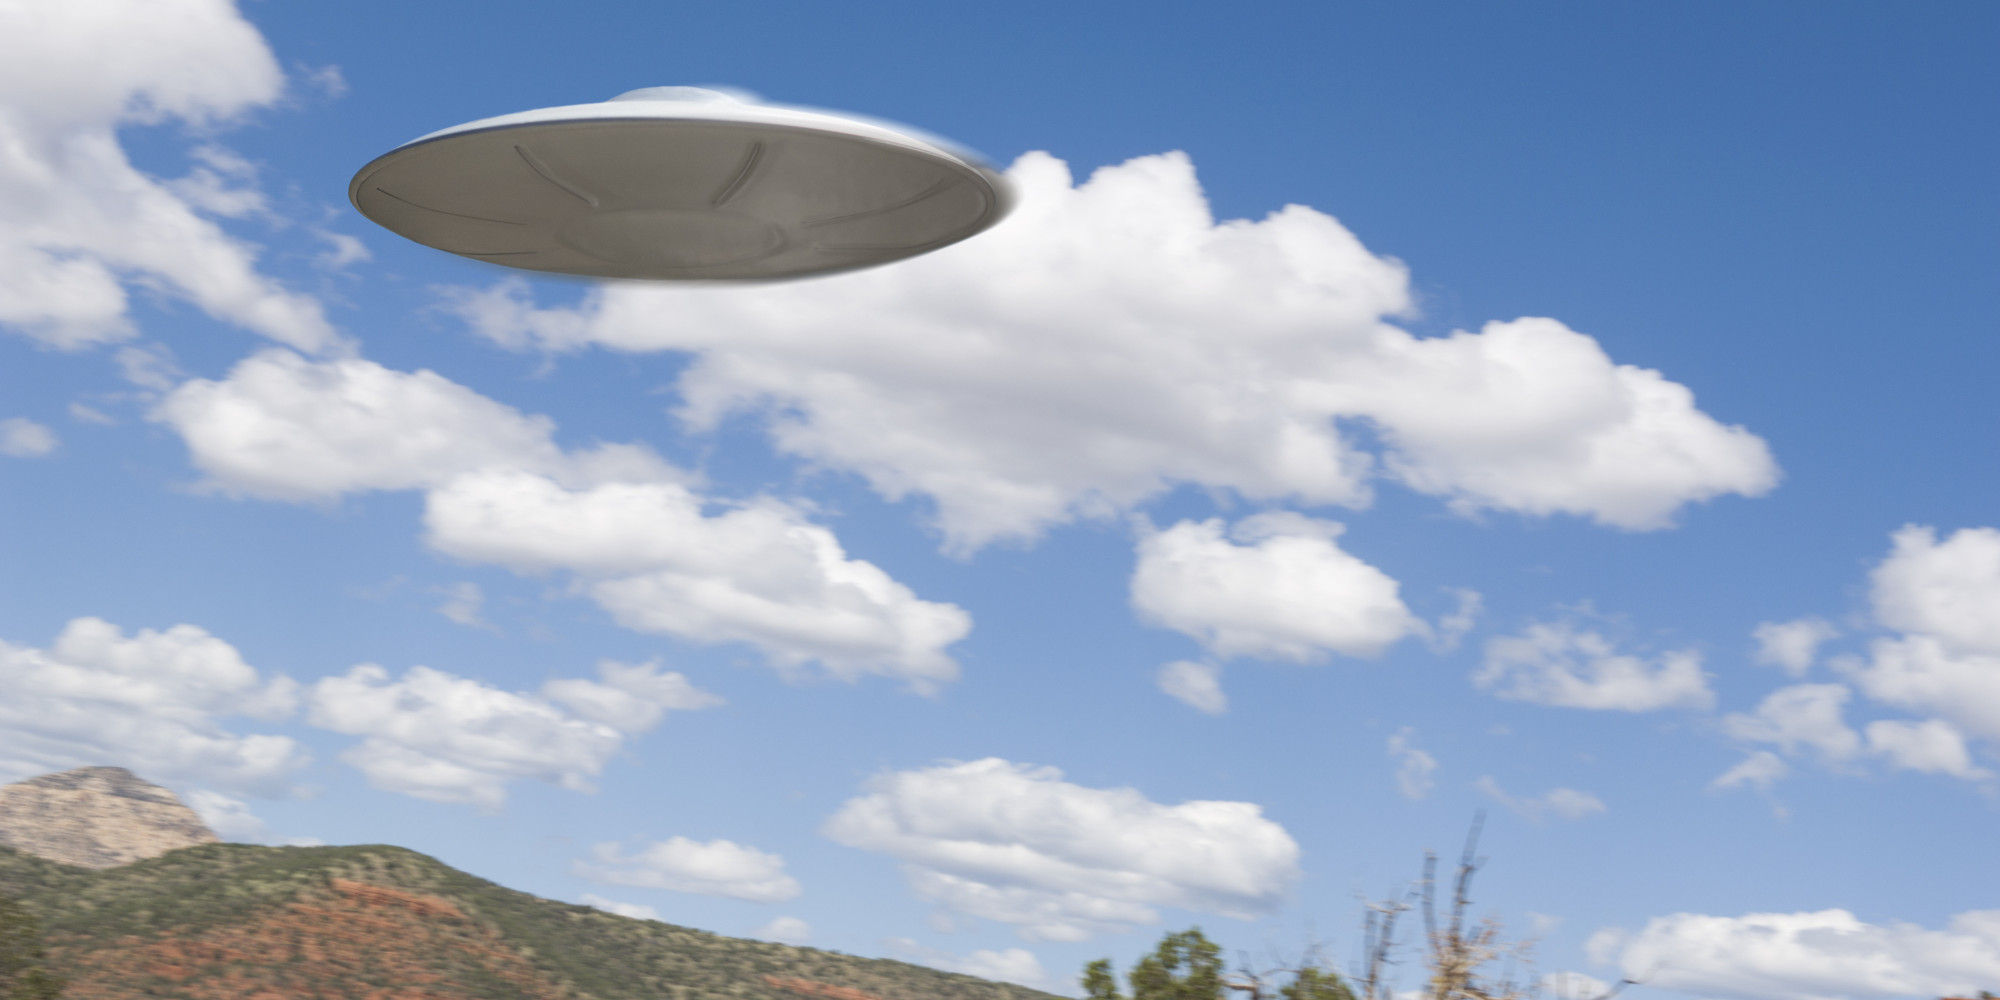 Usaf Investigation Of Ufo Over Travis Air Force Base Among Unidentified